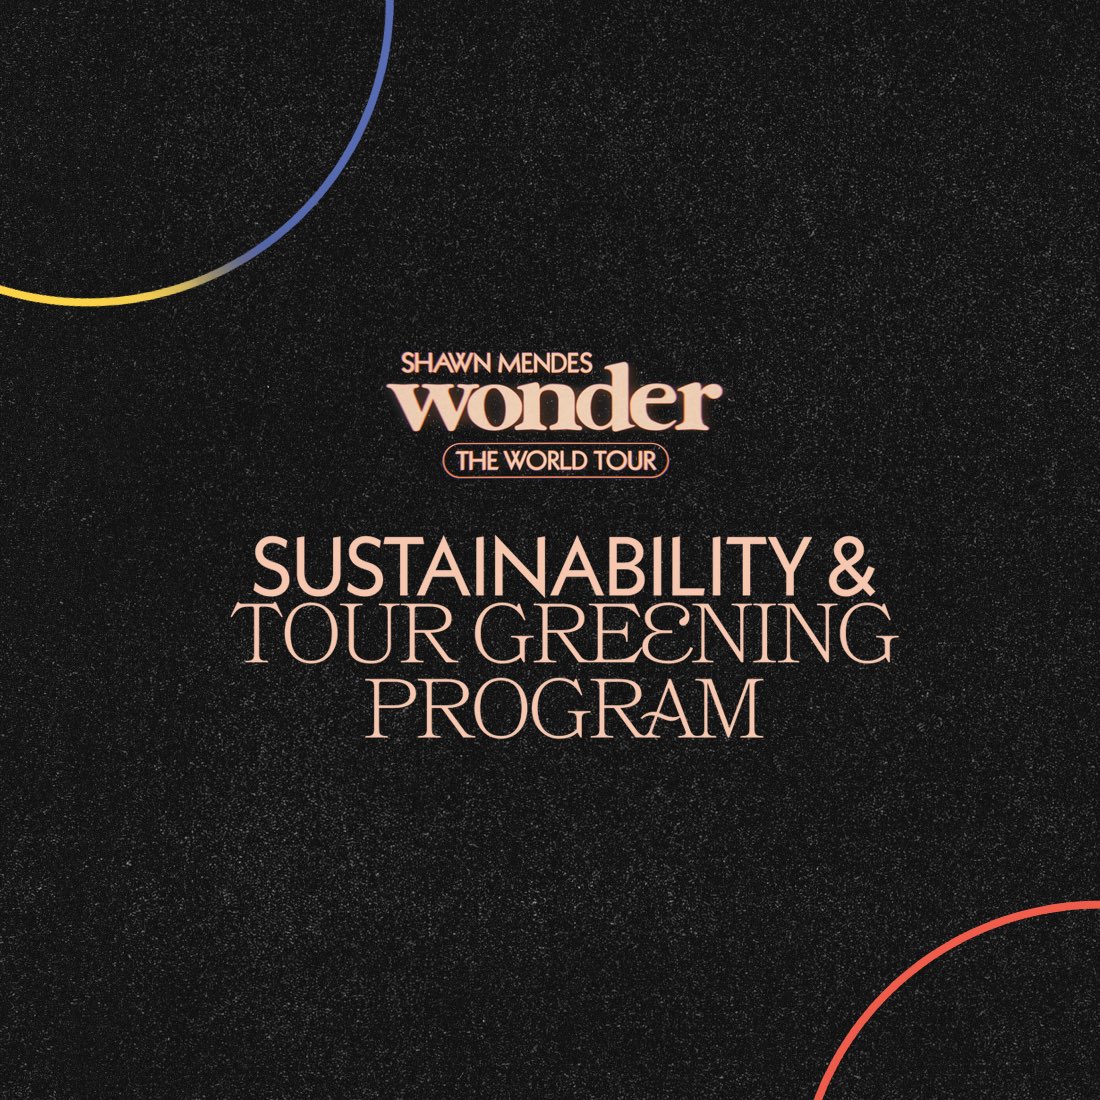 Over the last year, my team & I set out to develop a sustainability program with the goal to make a fully climate positive tour, so we could contribute to making the way we tour greener. Read a letter from me & more about our program here wonderthetour.com/sustainability